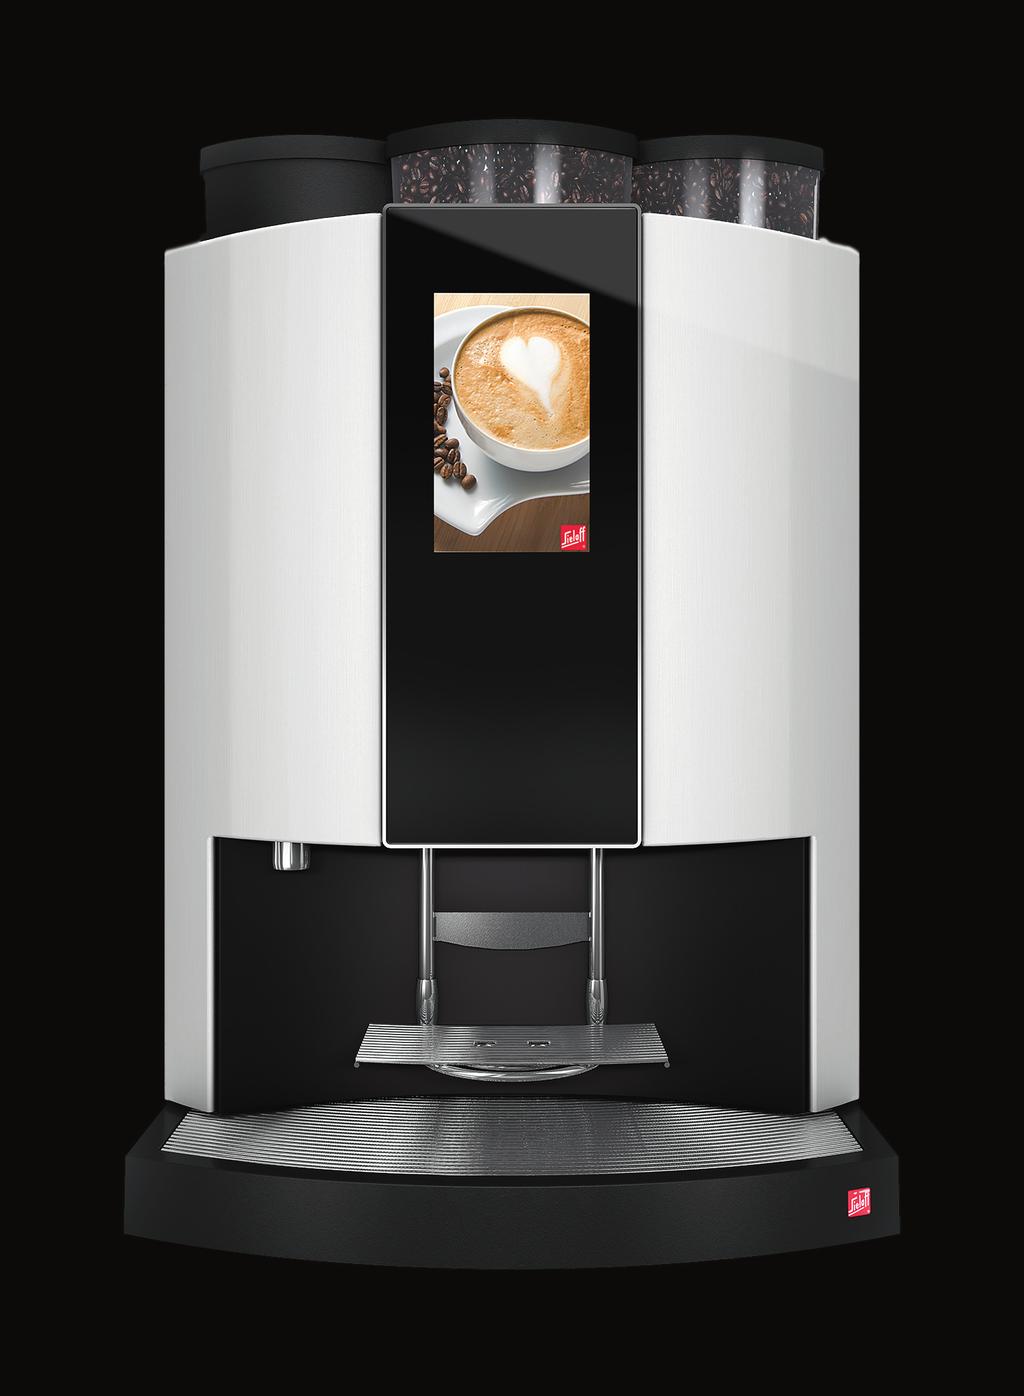 First-class durability The SIAMONIE is fitted with top quality parts as used in the HoReCa sector.